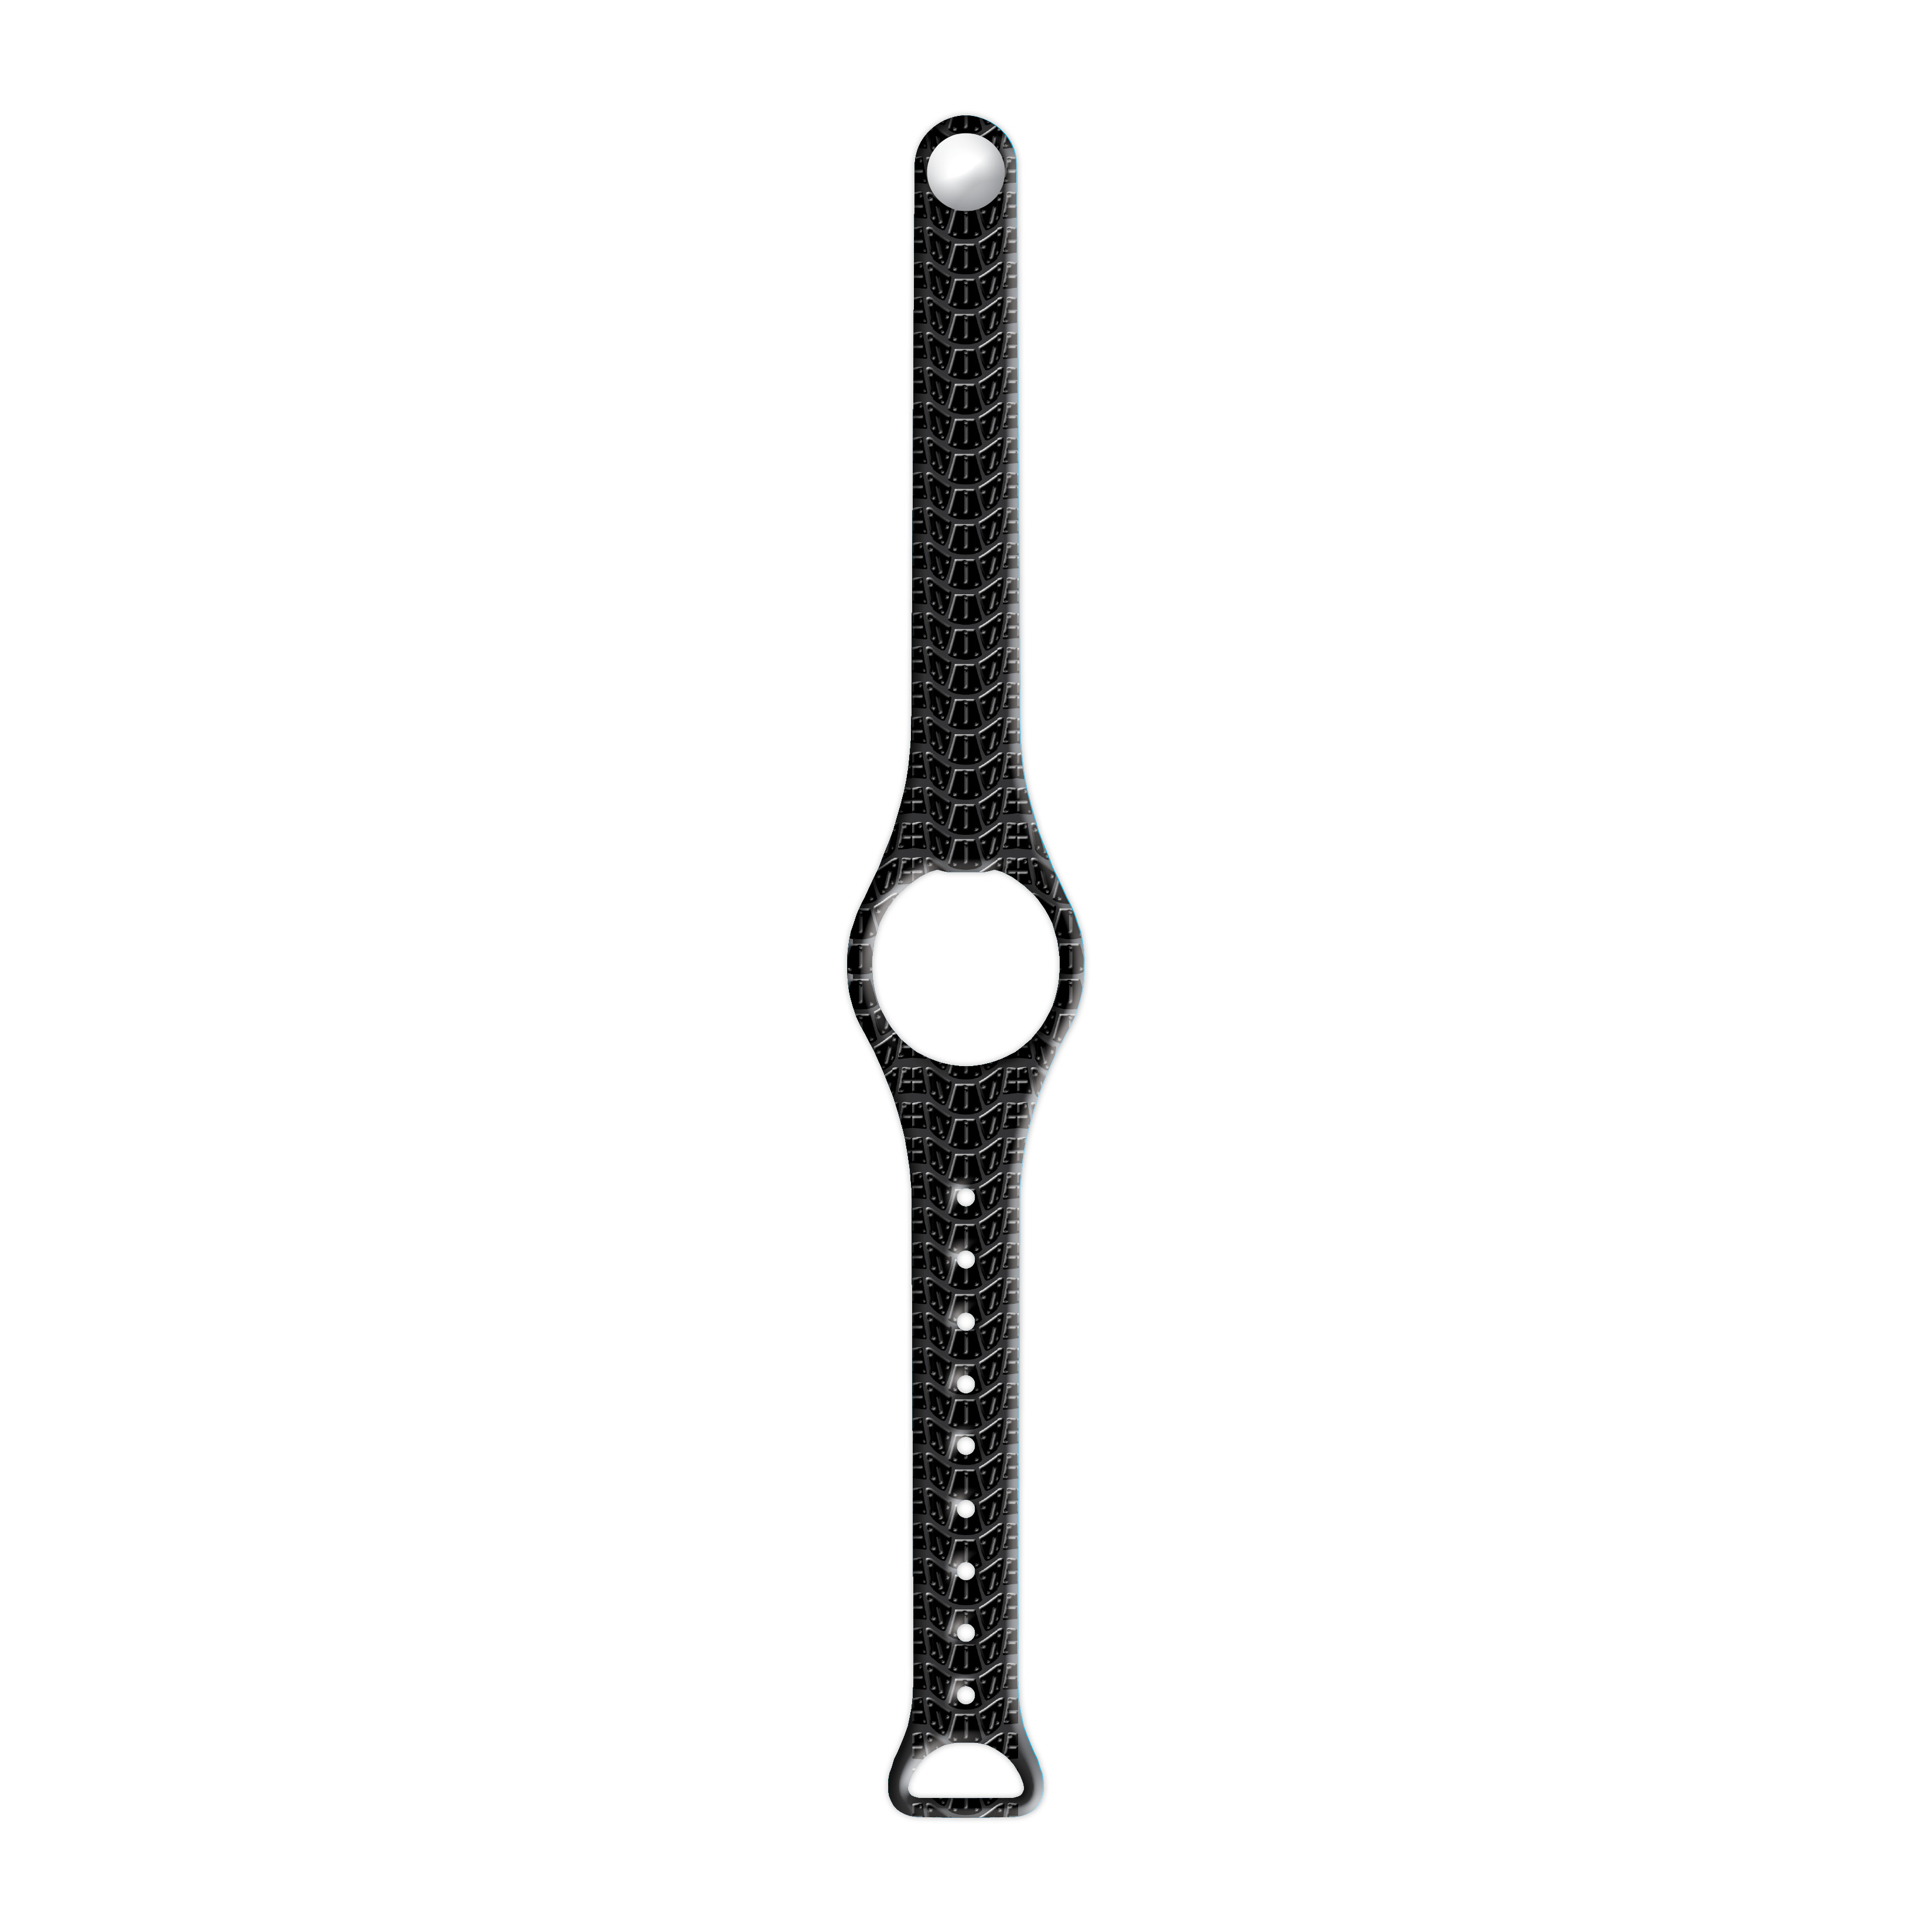 Grip - Watchitude Move 2 | Blip Watch Band (Band Only)